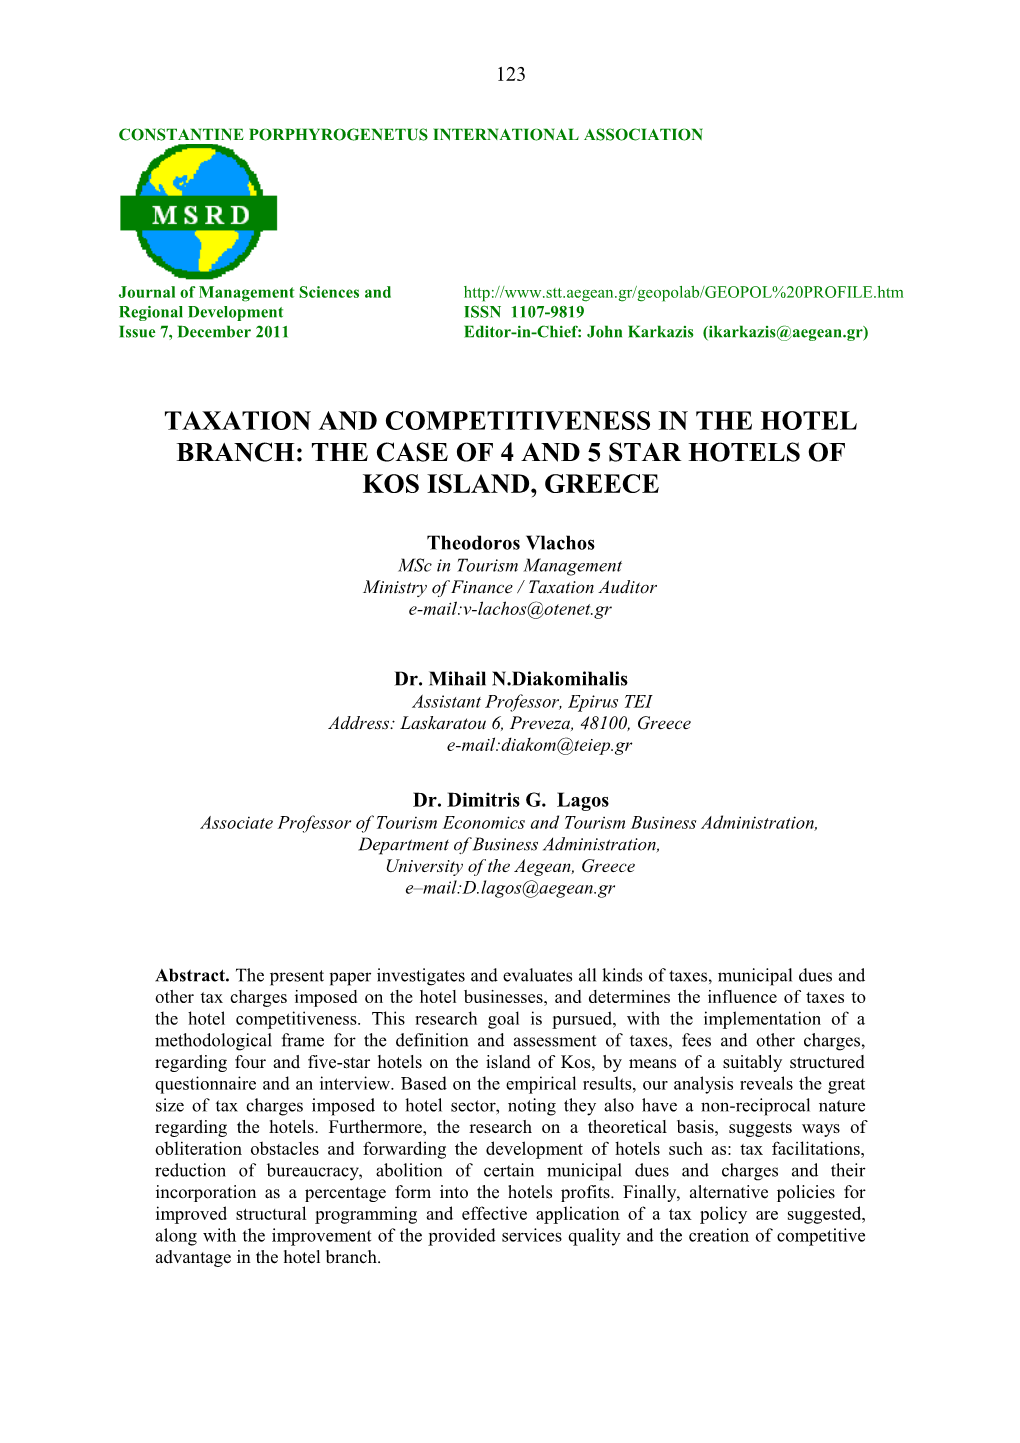 Private/MSRD 7 - Vlachos Diakomichalis Lagos - TAXATION and COMPETITIVENESS in the HOTEL